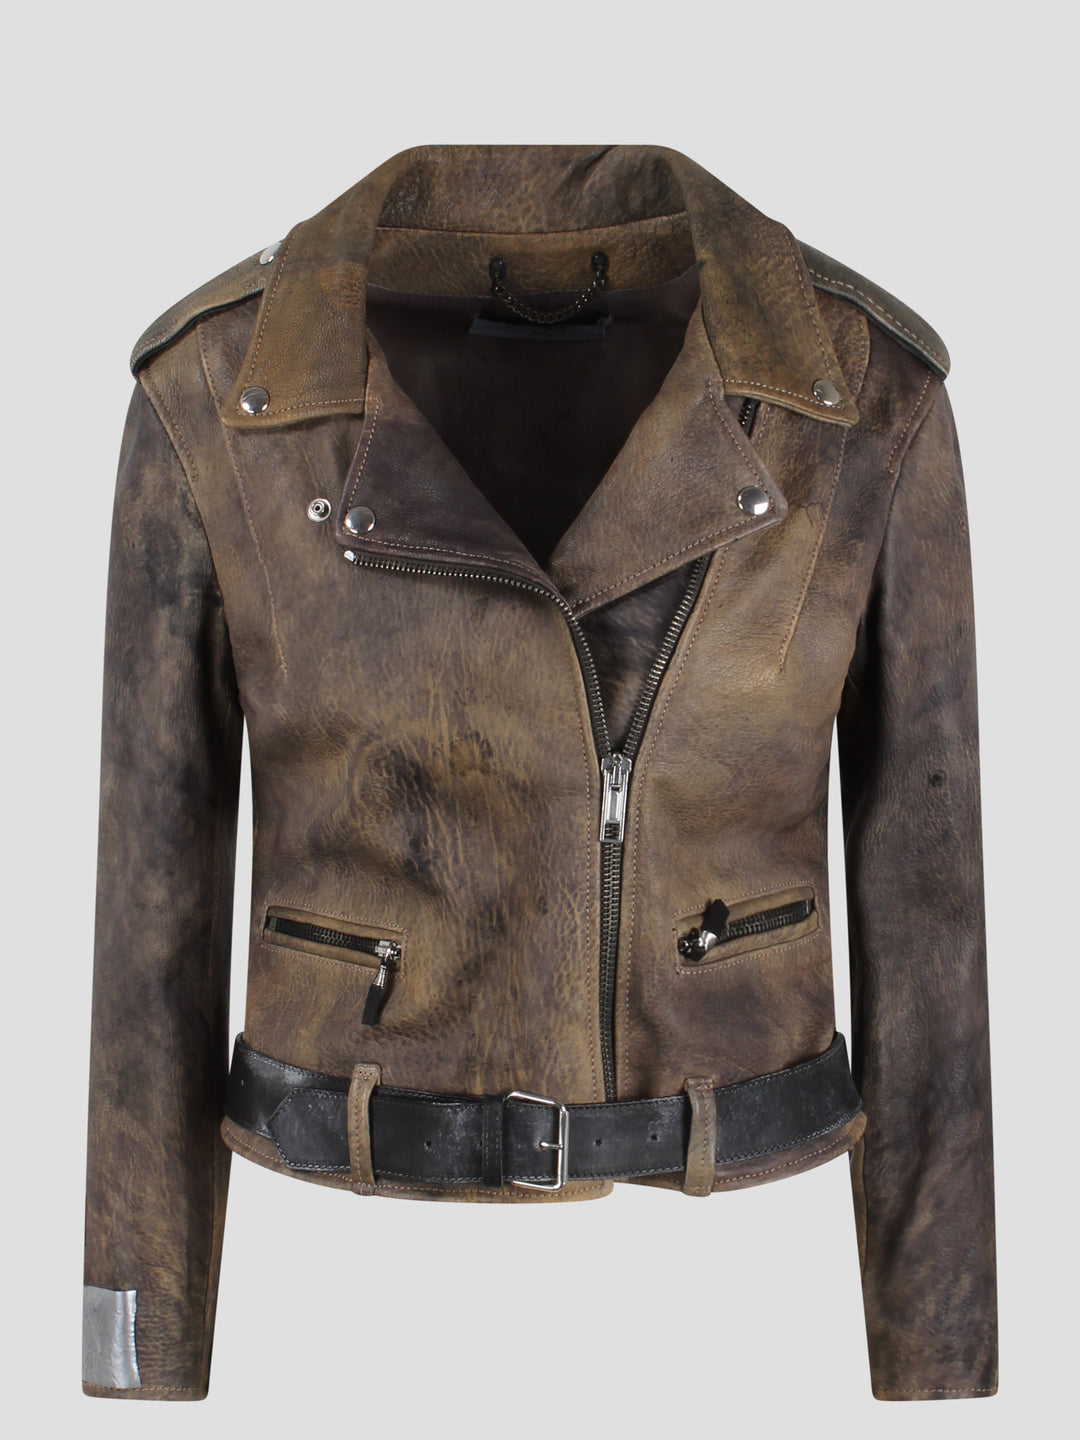 Chiodo leather jacket